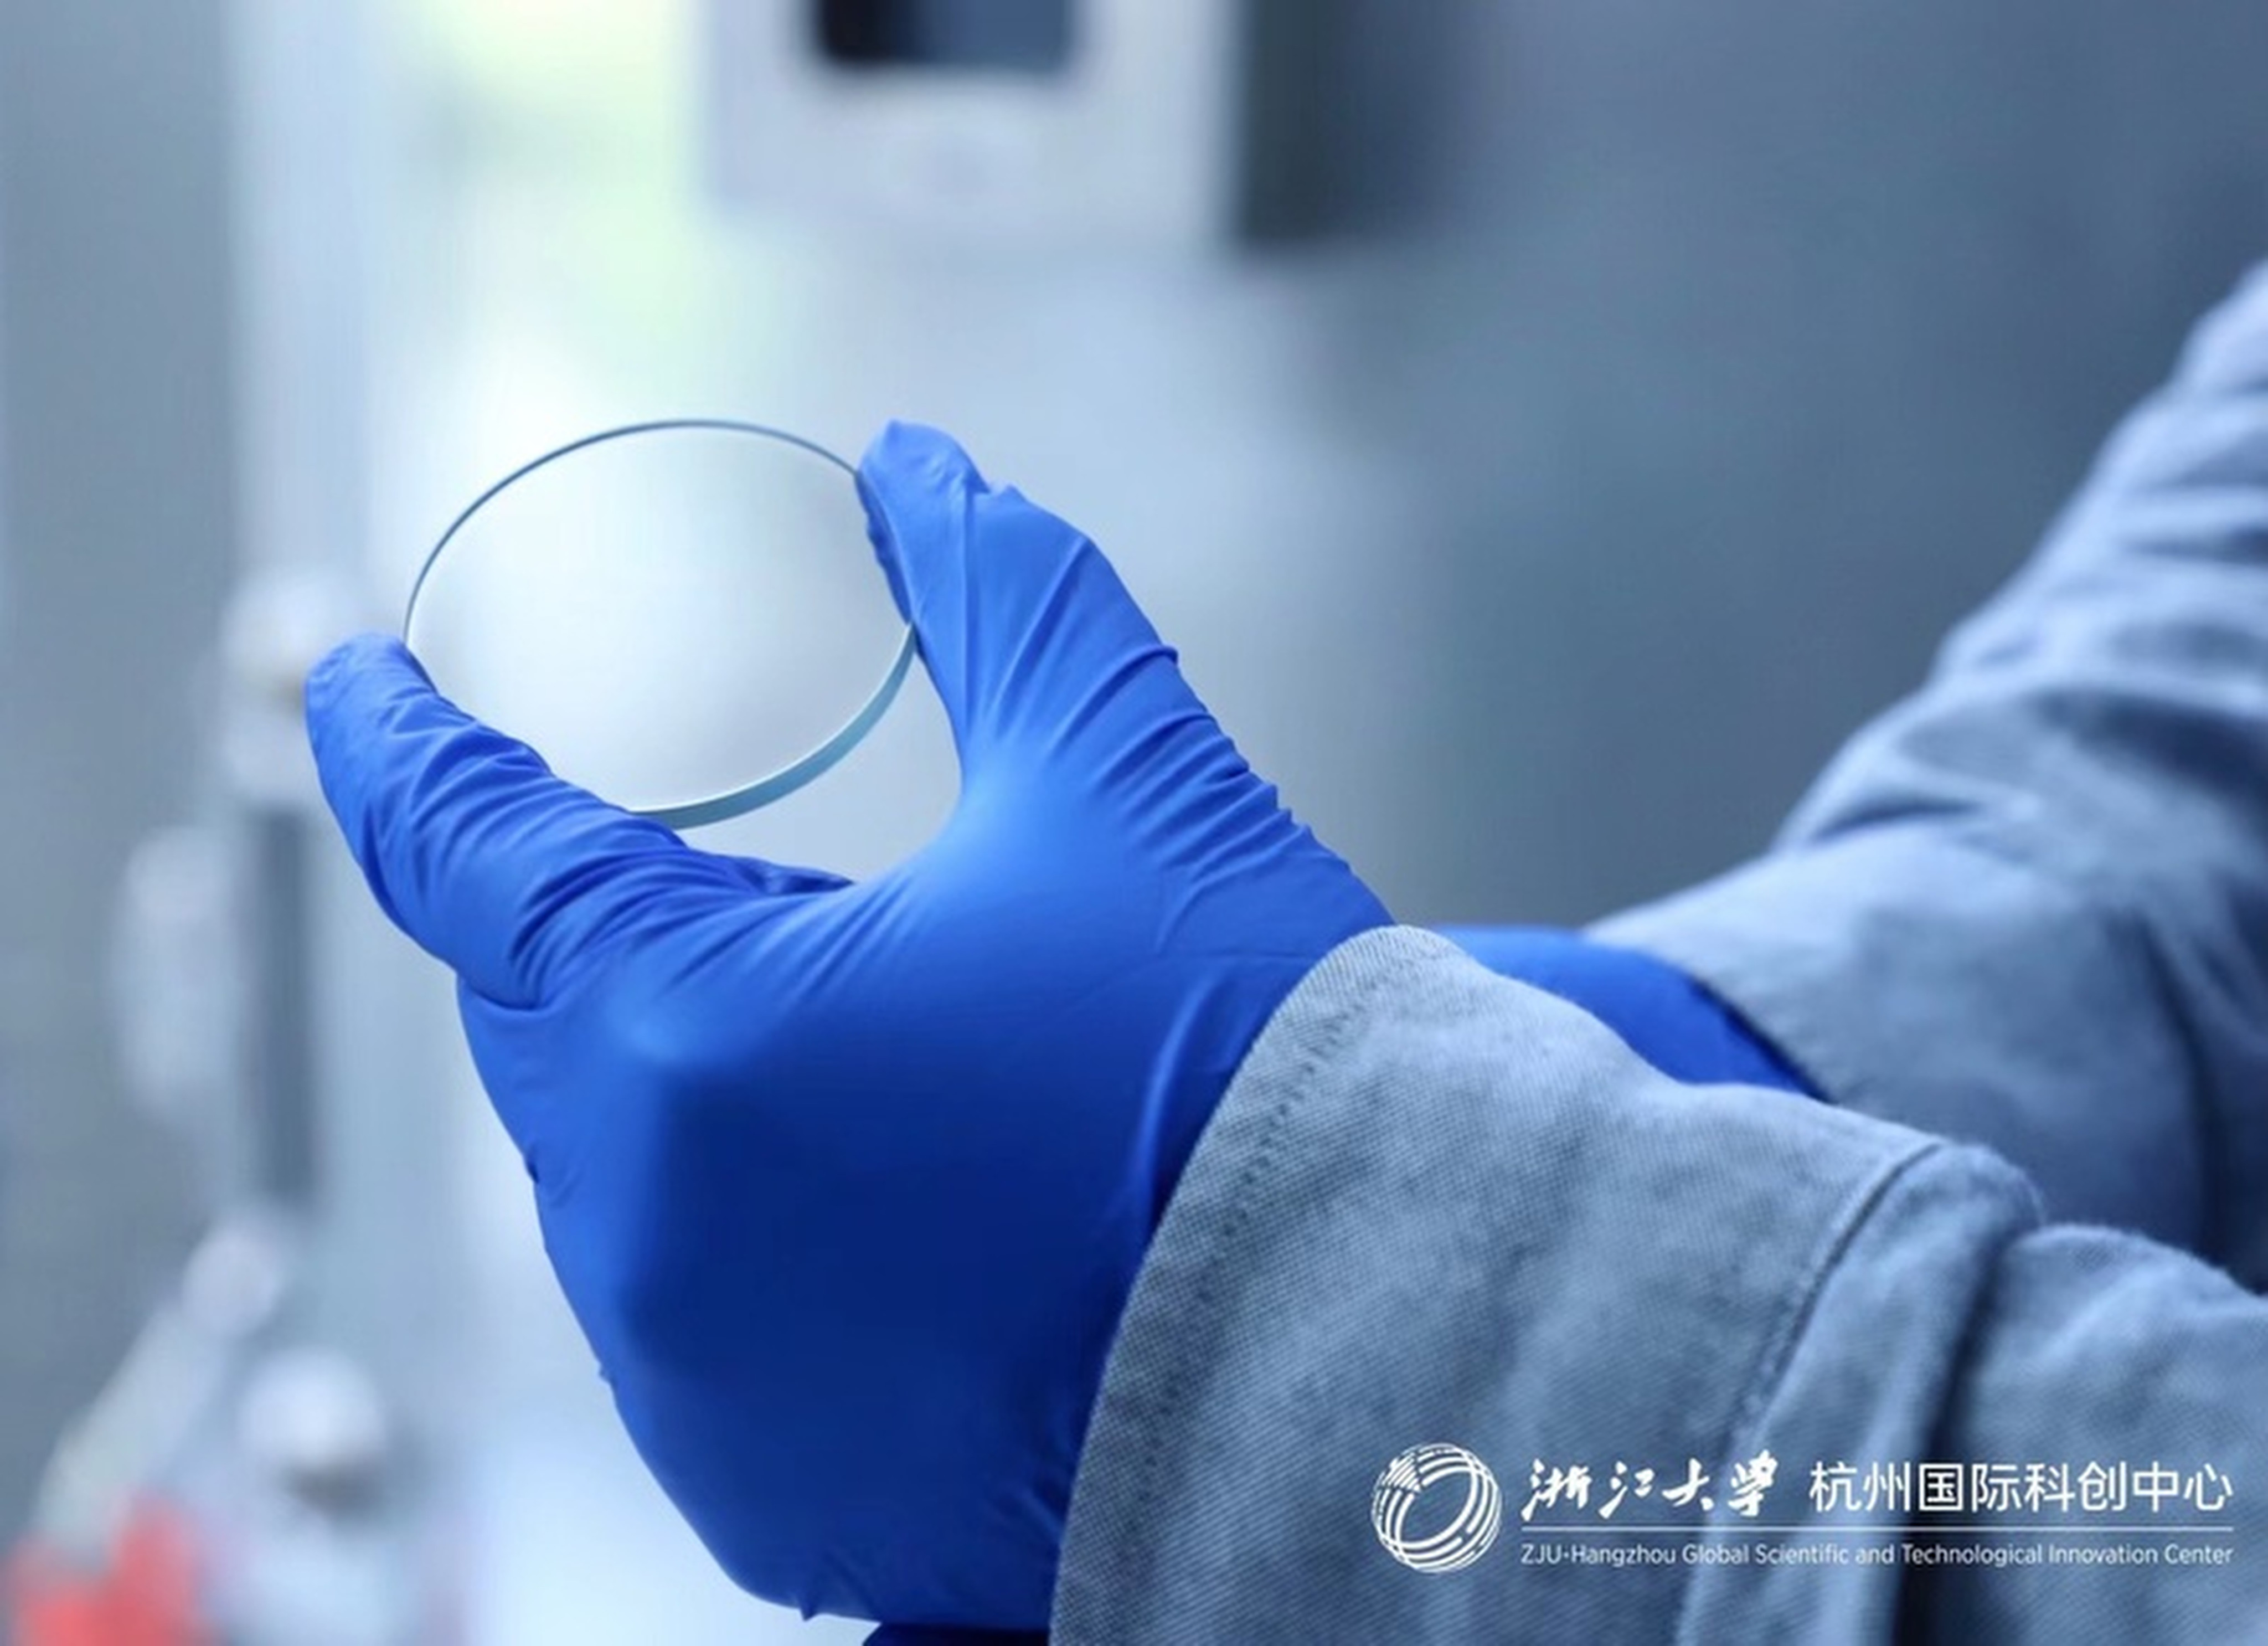 Last year, the US Commerce Department’s Bureau of Industry and Security imposed an export ban on advanced semiconductors, including gallium oxide, citing national security concerns. Photo: ZJU-Hangzhou Global Scientific Technological Innovation Centre